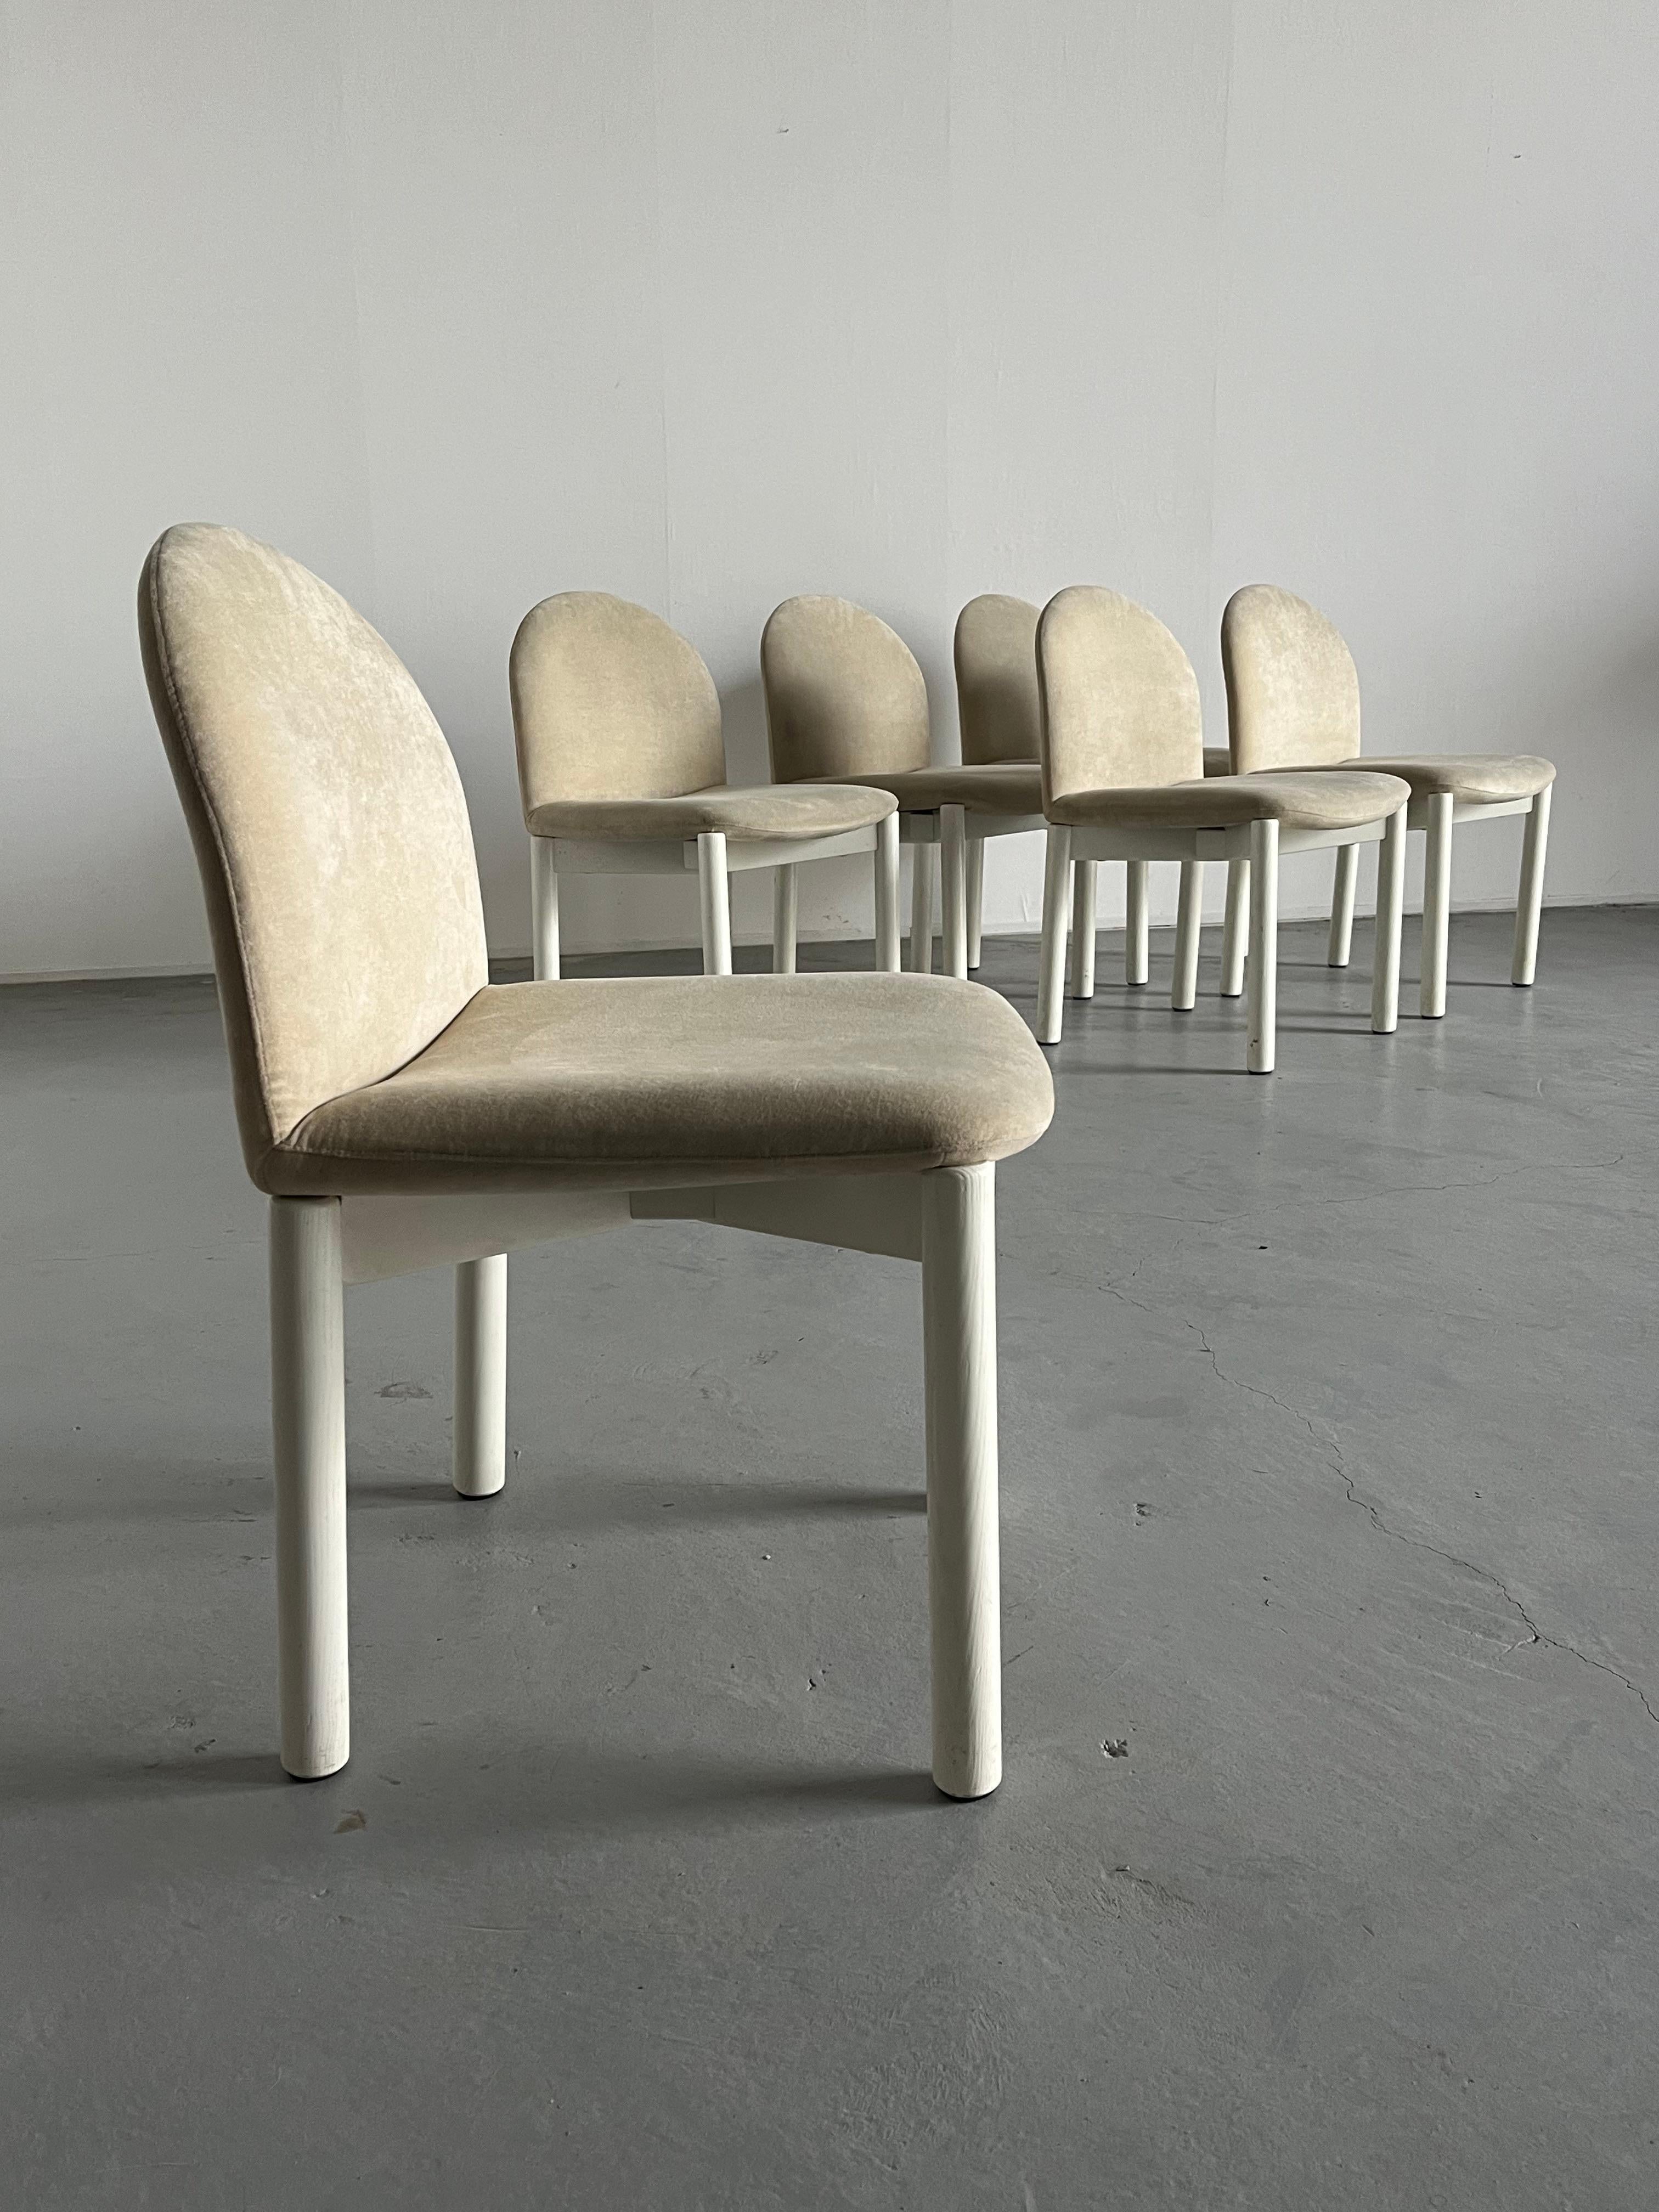 Set of 6 Mid-Century Modern 'Combra' Dining Chairs by Cor, 1980s Germany 4